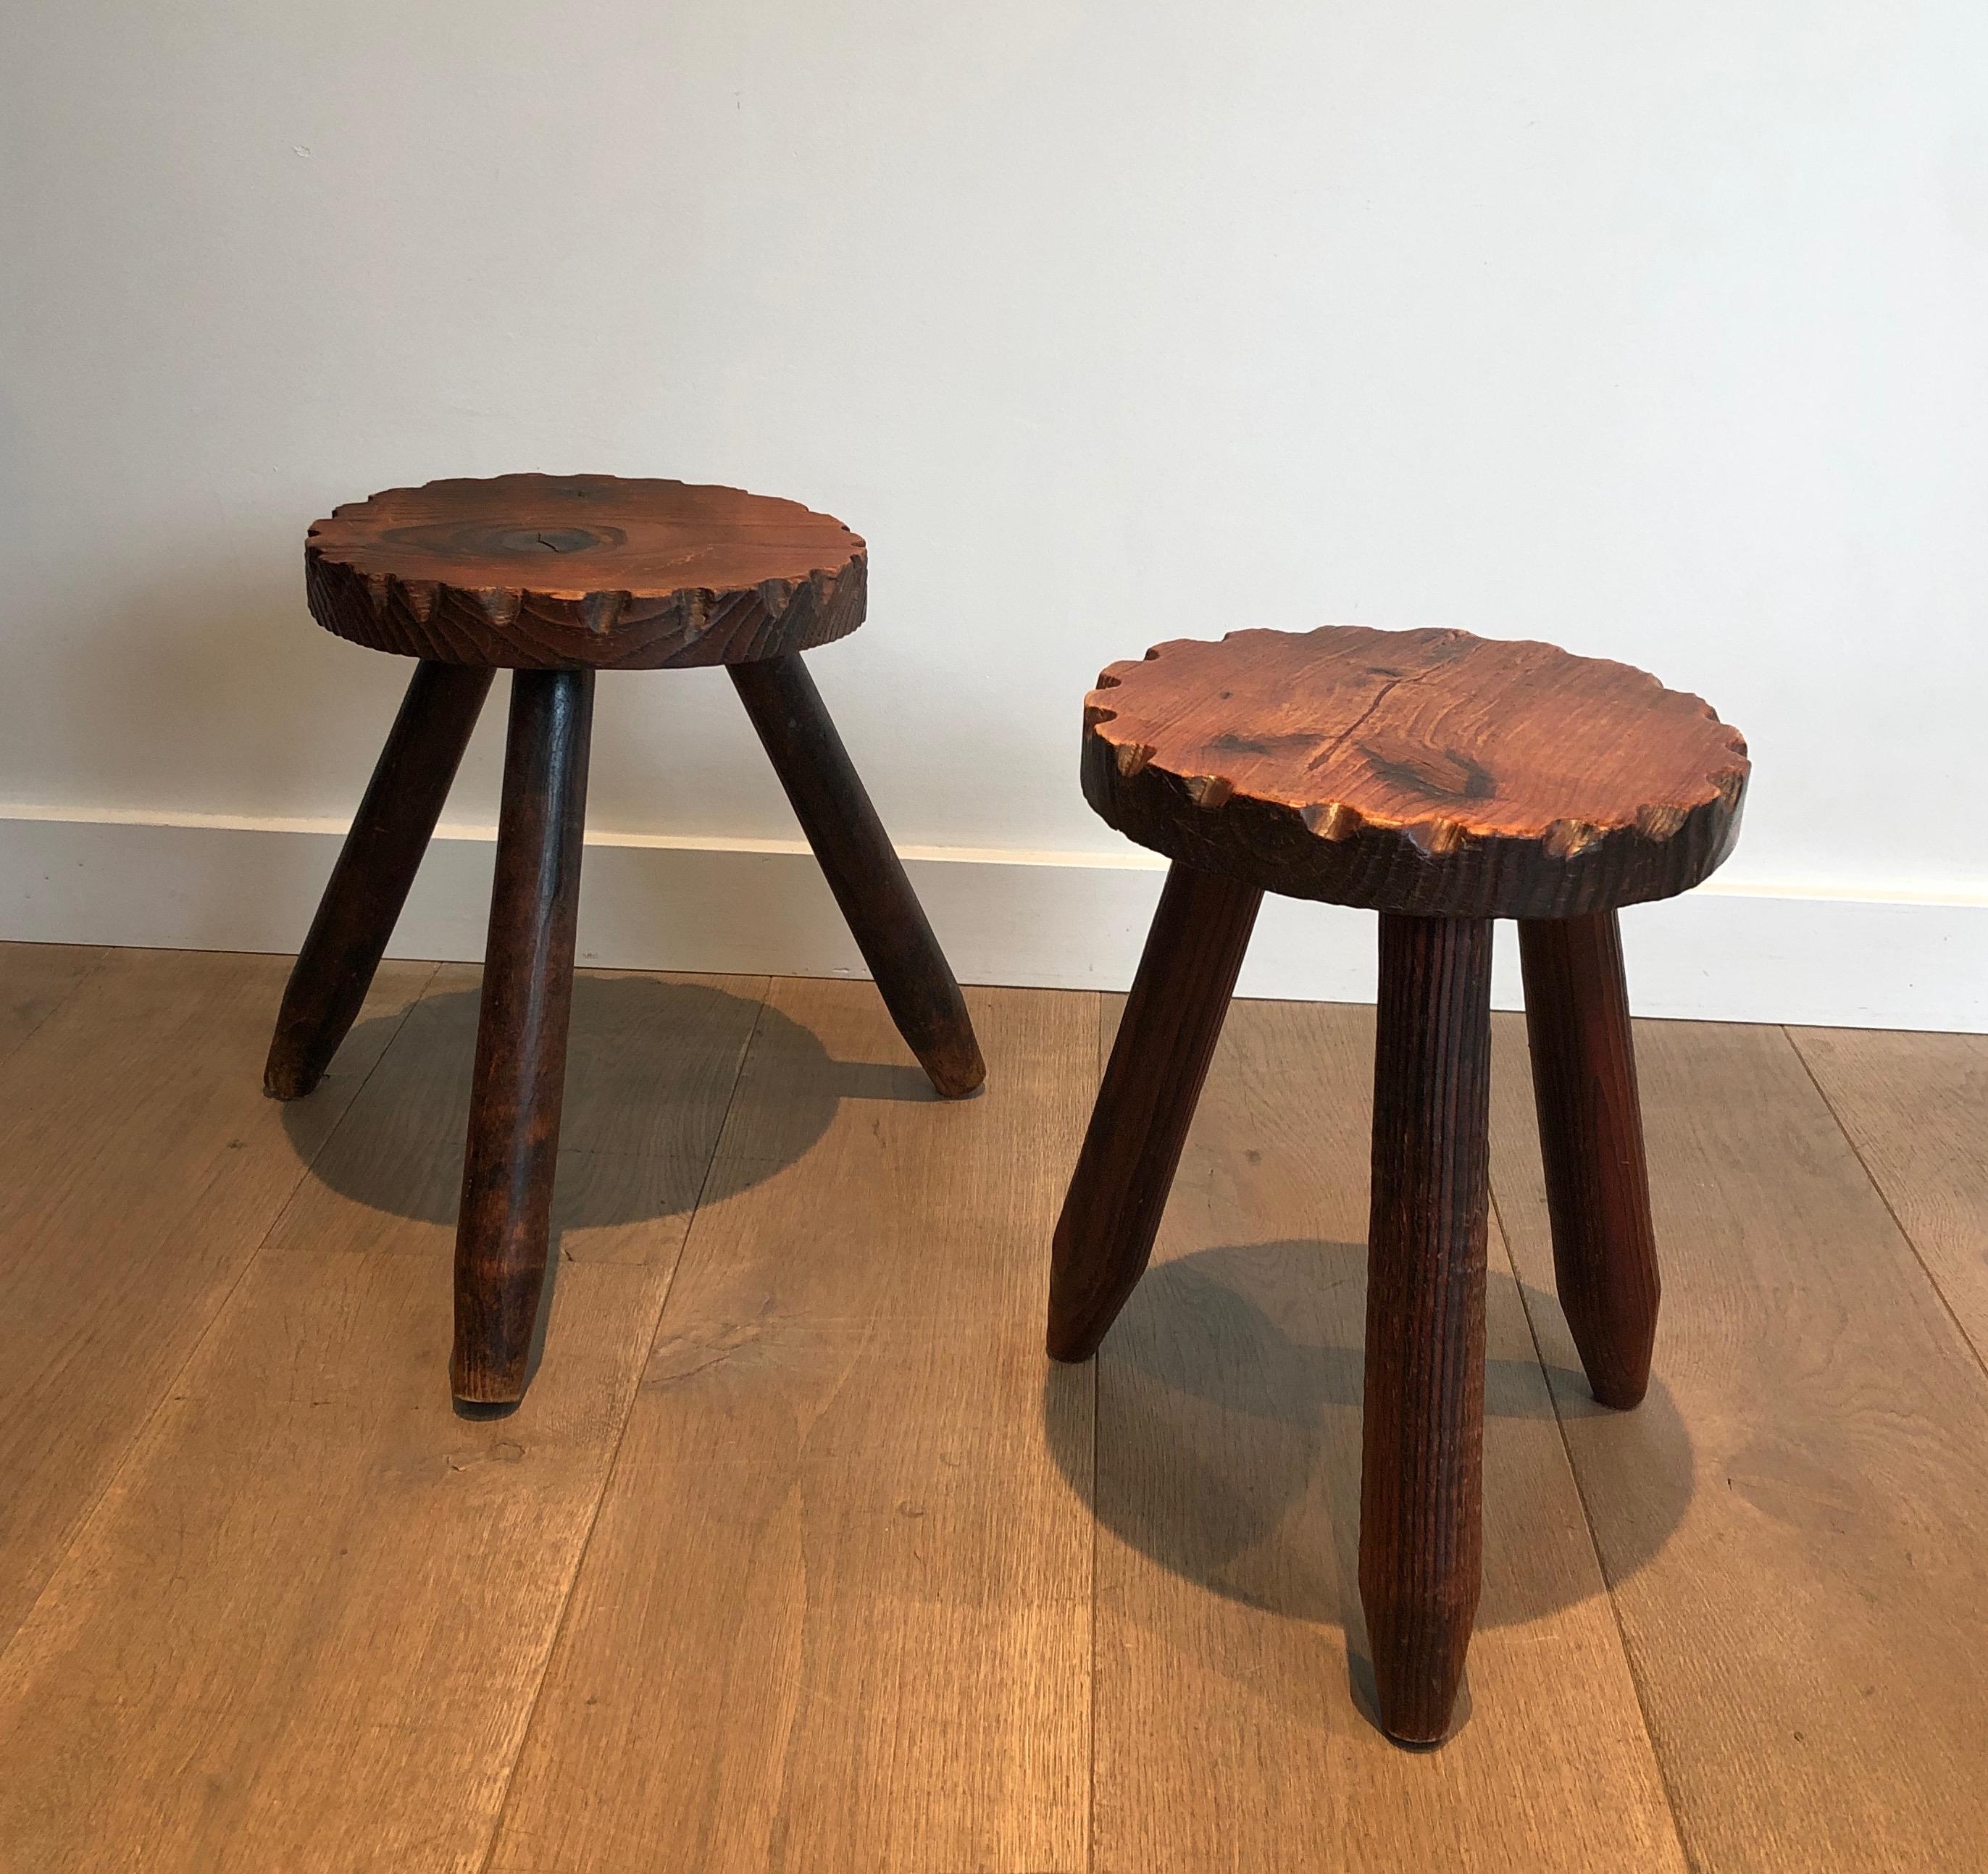 Pair of Pine Brutalist Stools, French Work, circa 1950 In Good Condition For Sale In Marcq-en-Barœul, Hauts-de-France